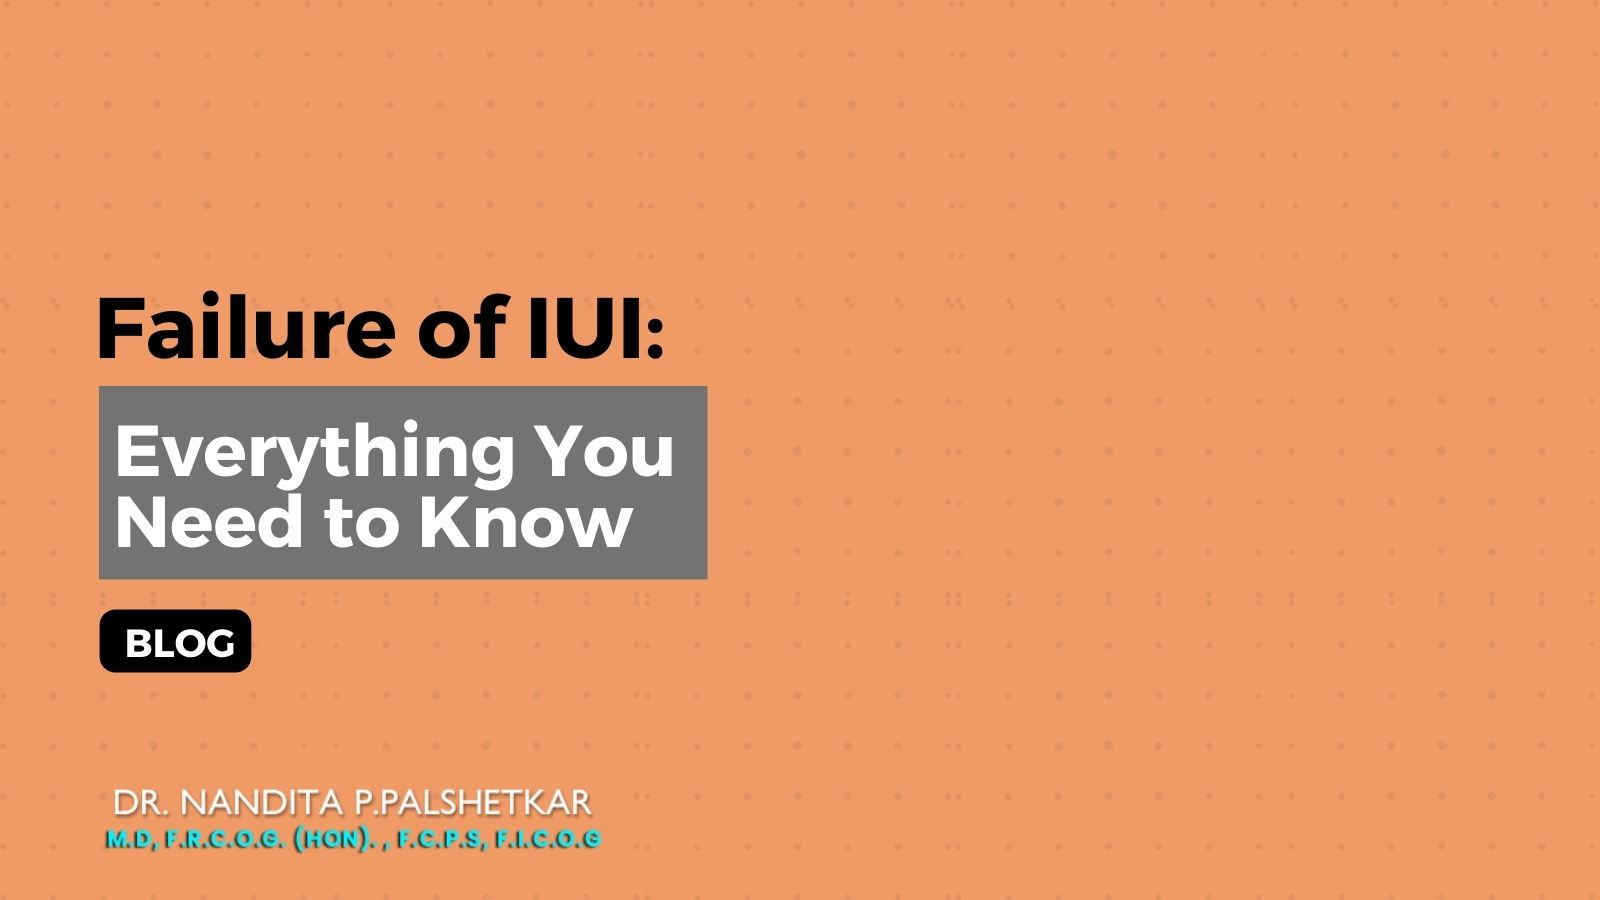 Failure of IUI: Everything You Need to Know